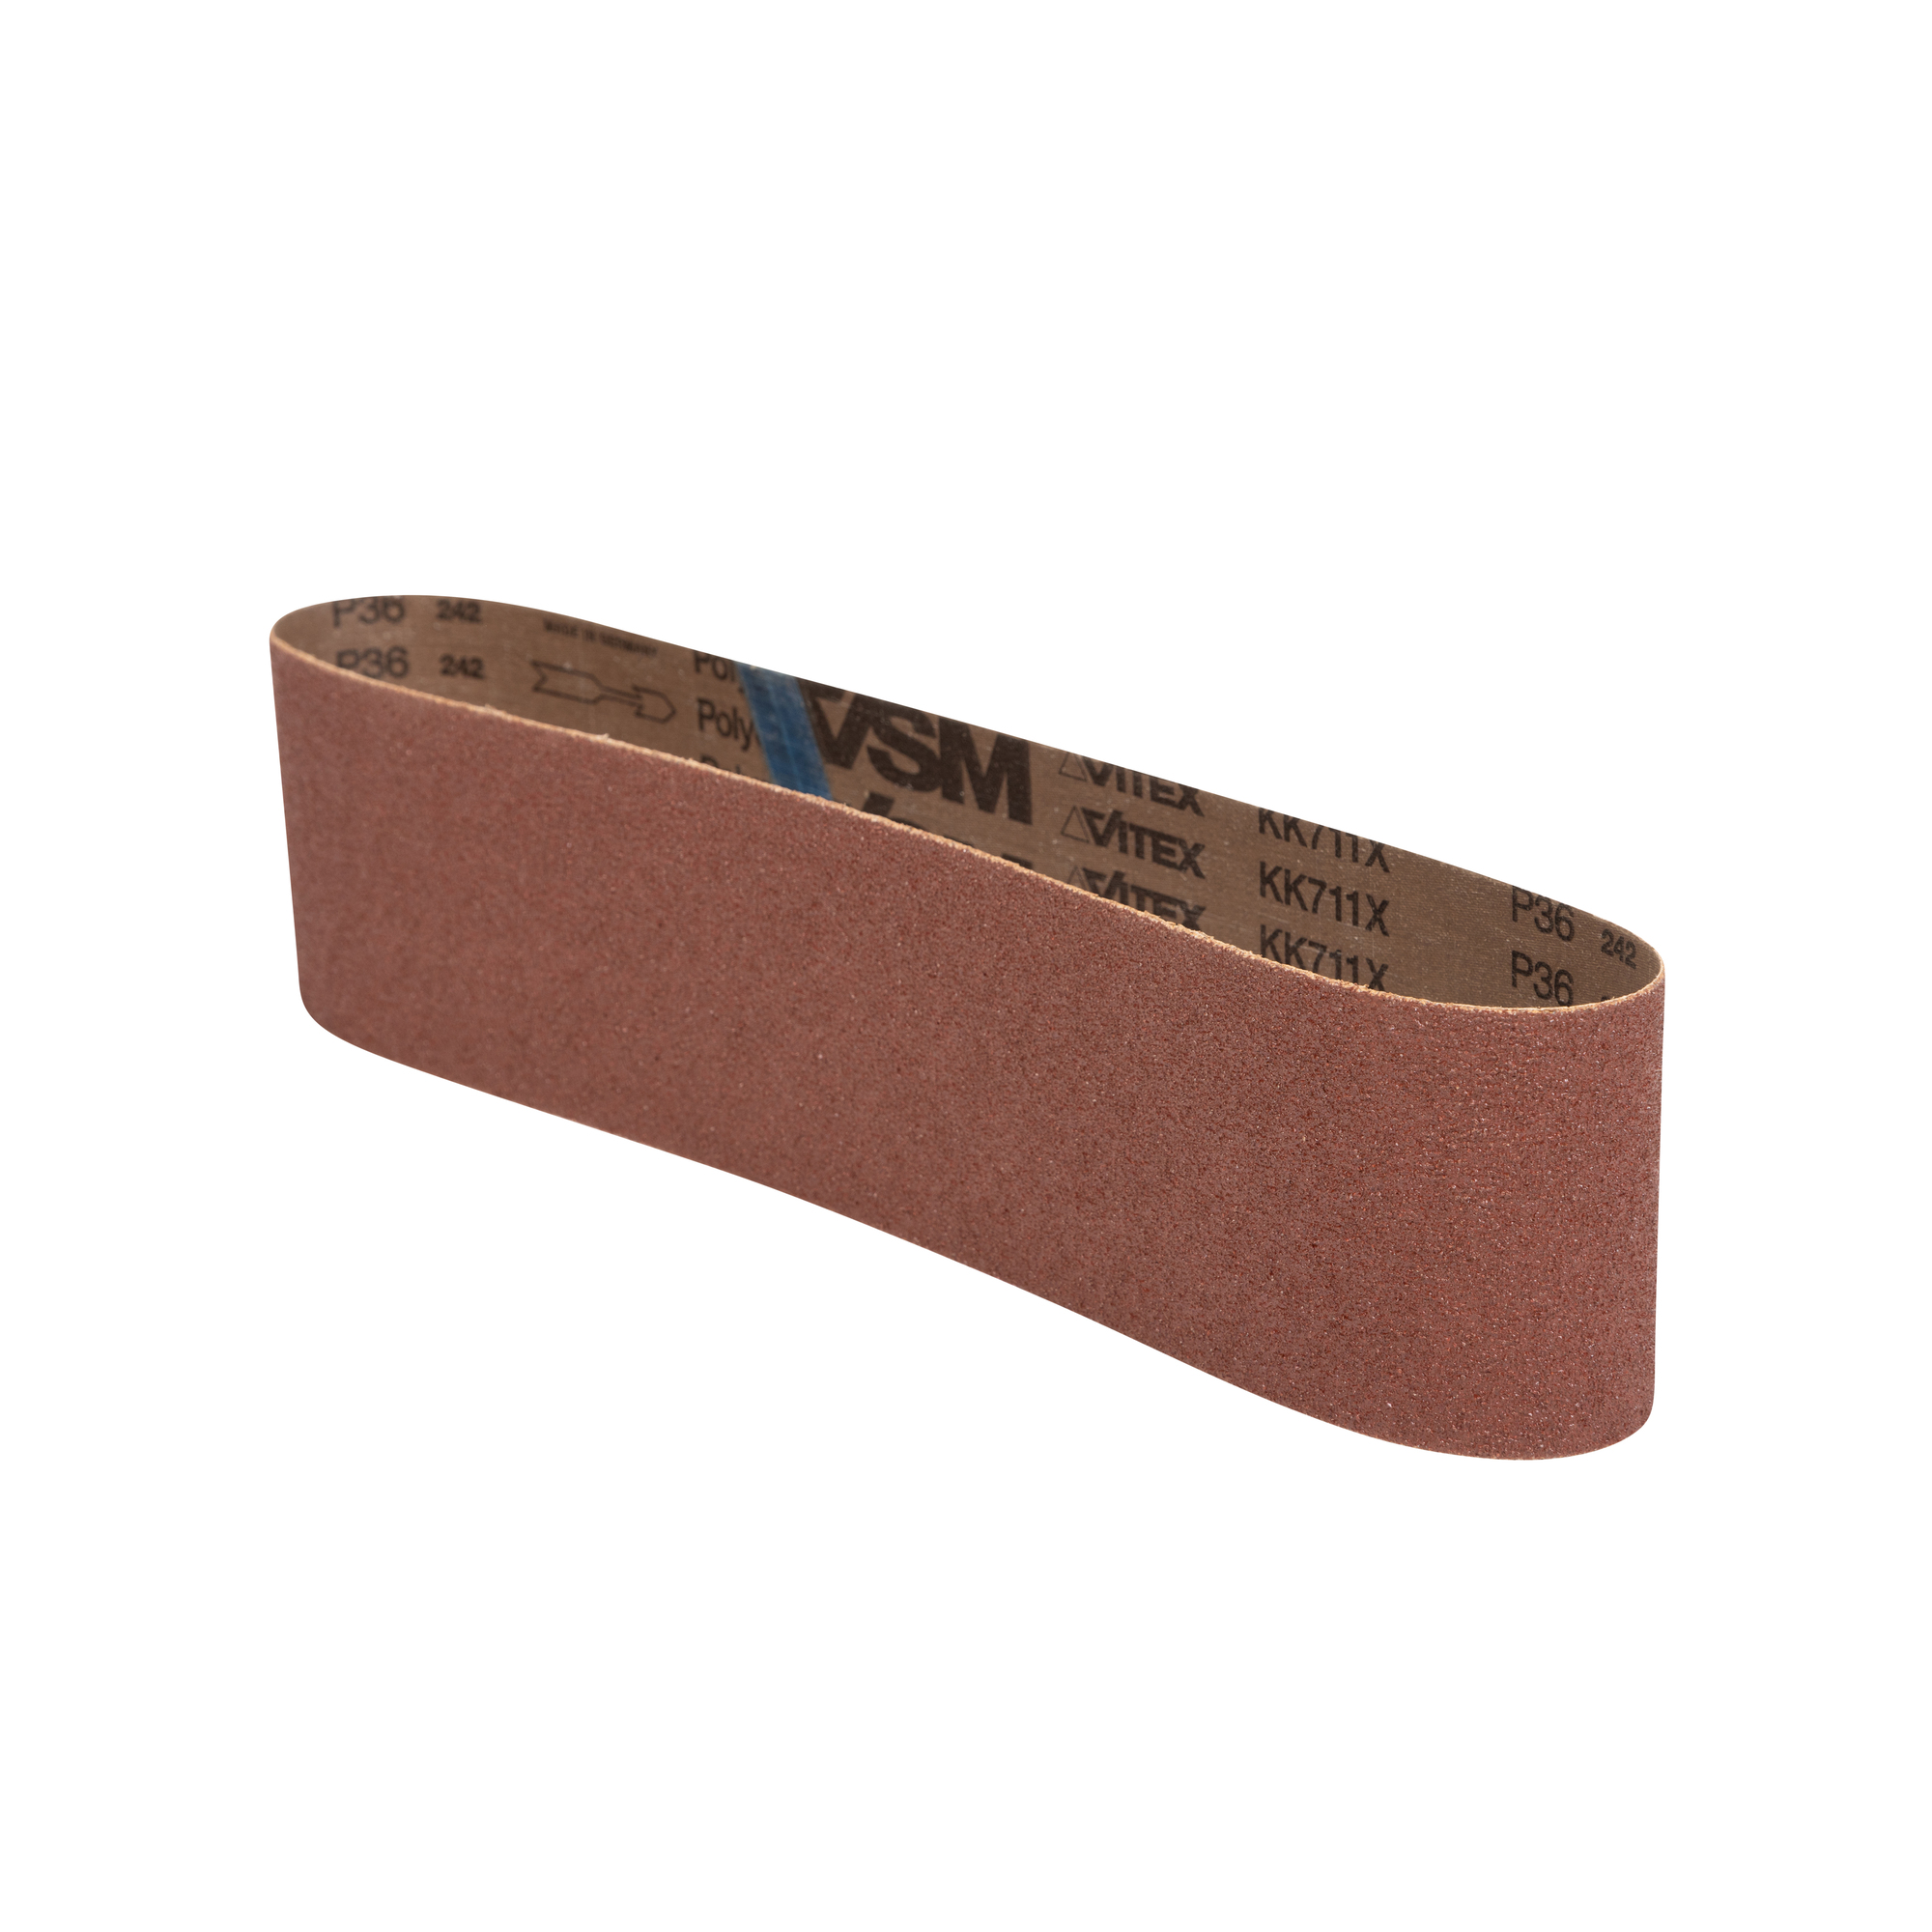 JET, Sand Paper, Pieces (qty.) 3 Grit 50 Length 36 in, Model 577539